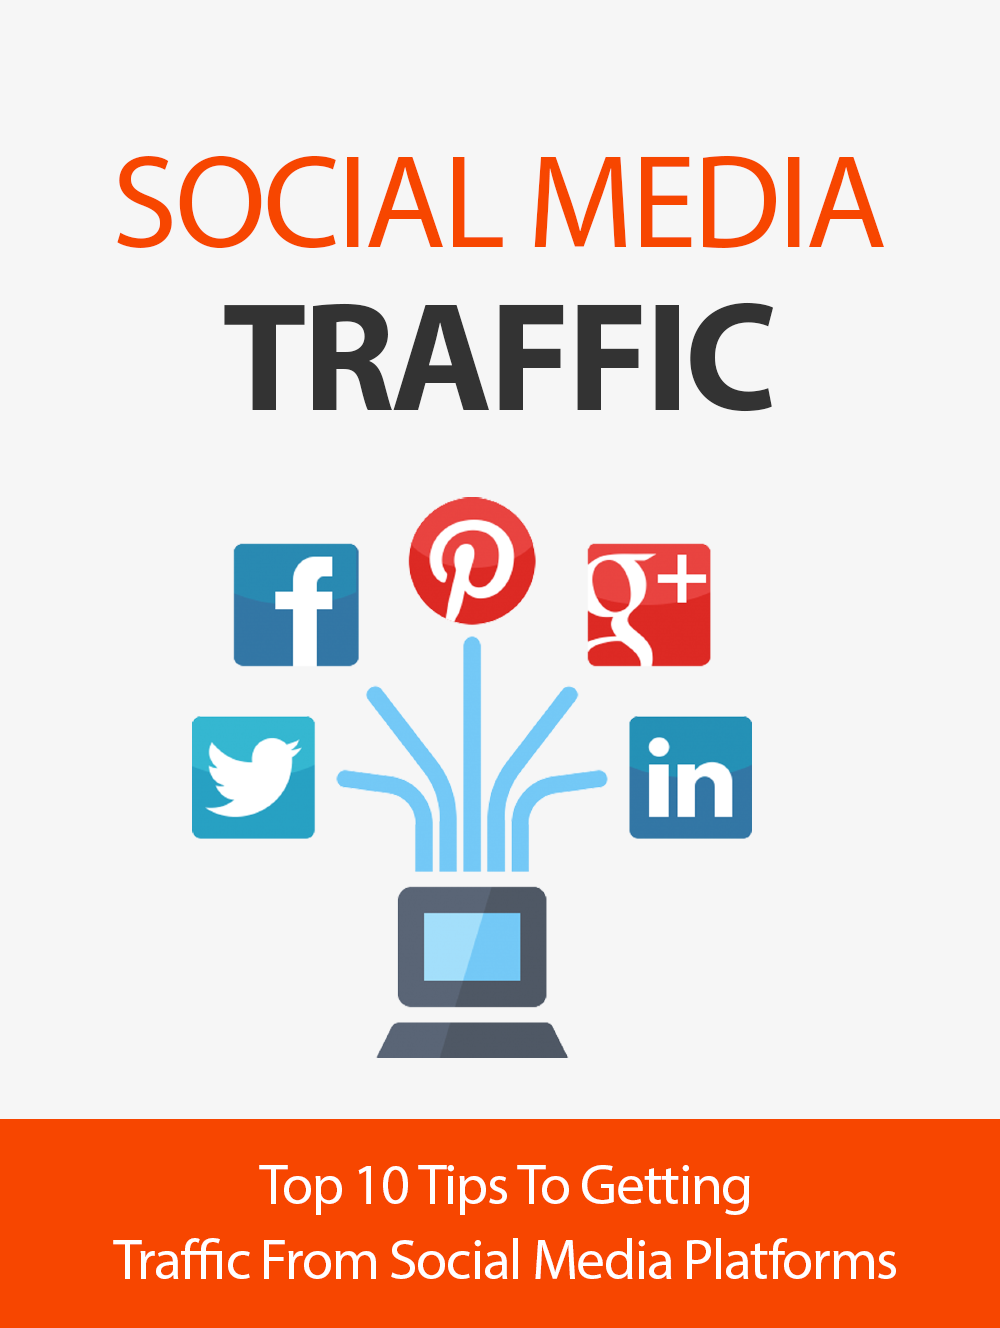 Get Traffic From Social Media Platforms Using These Top 10 Tips!